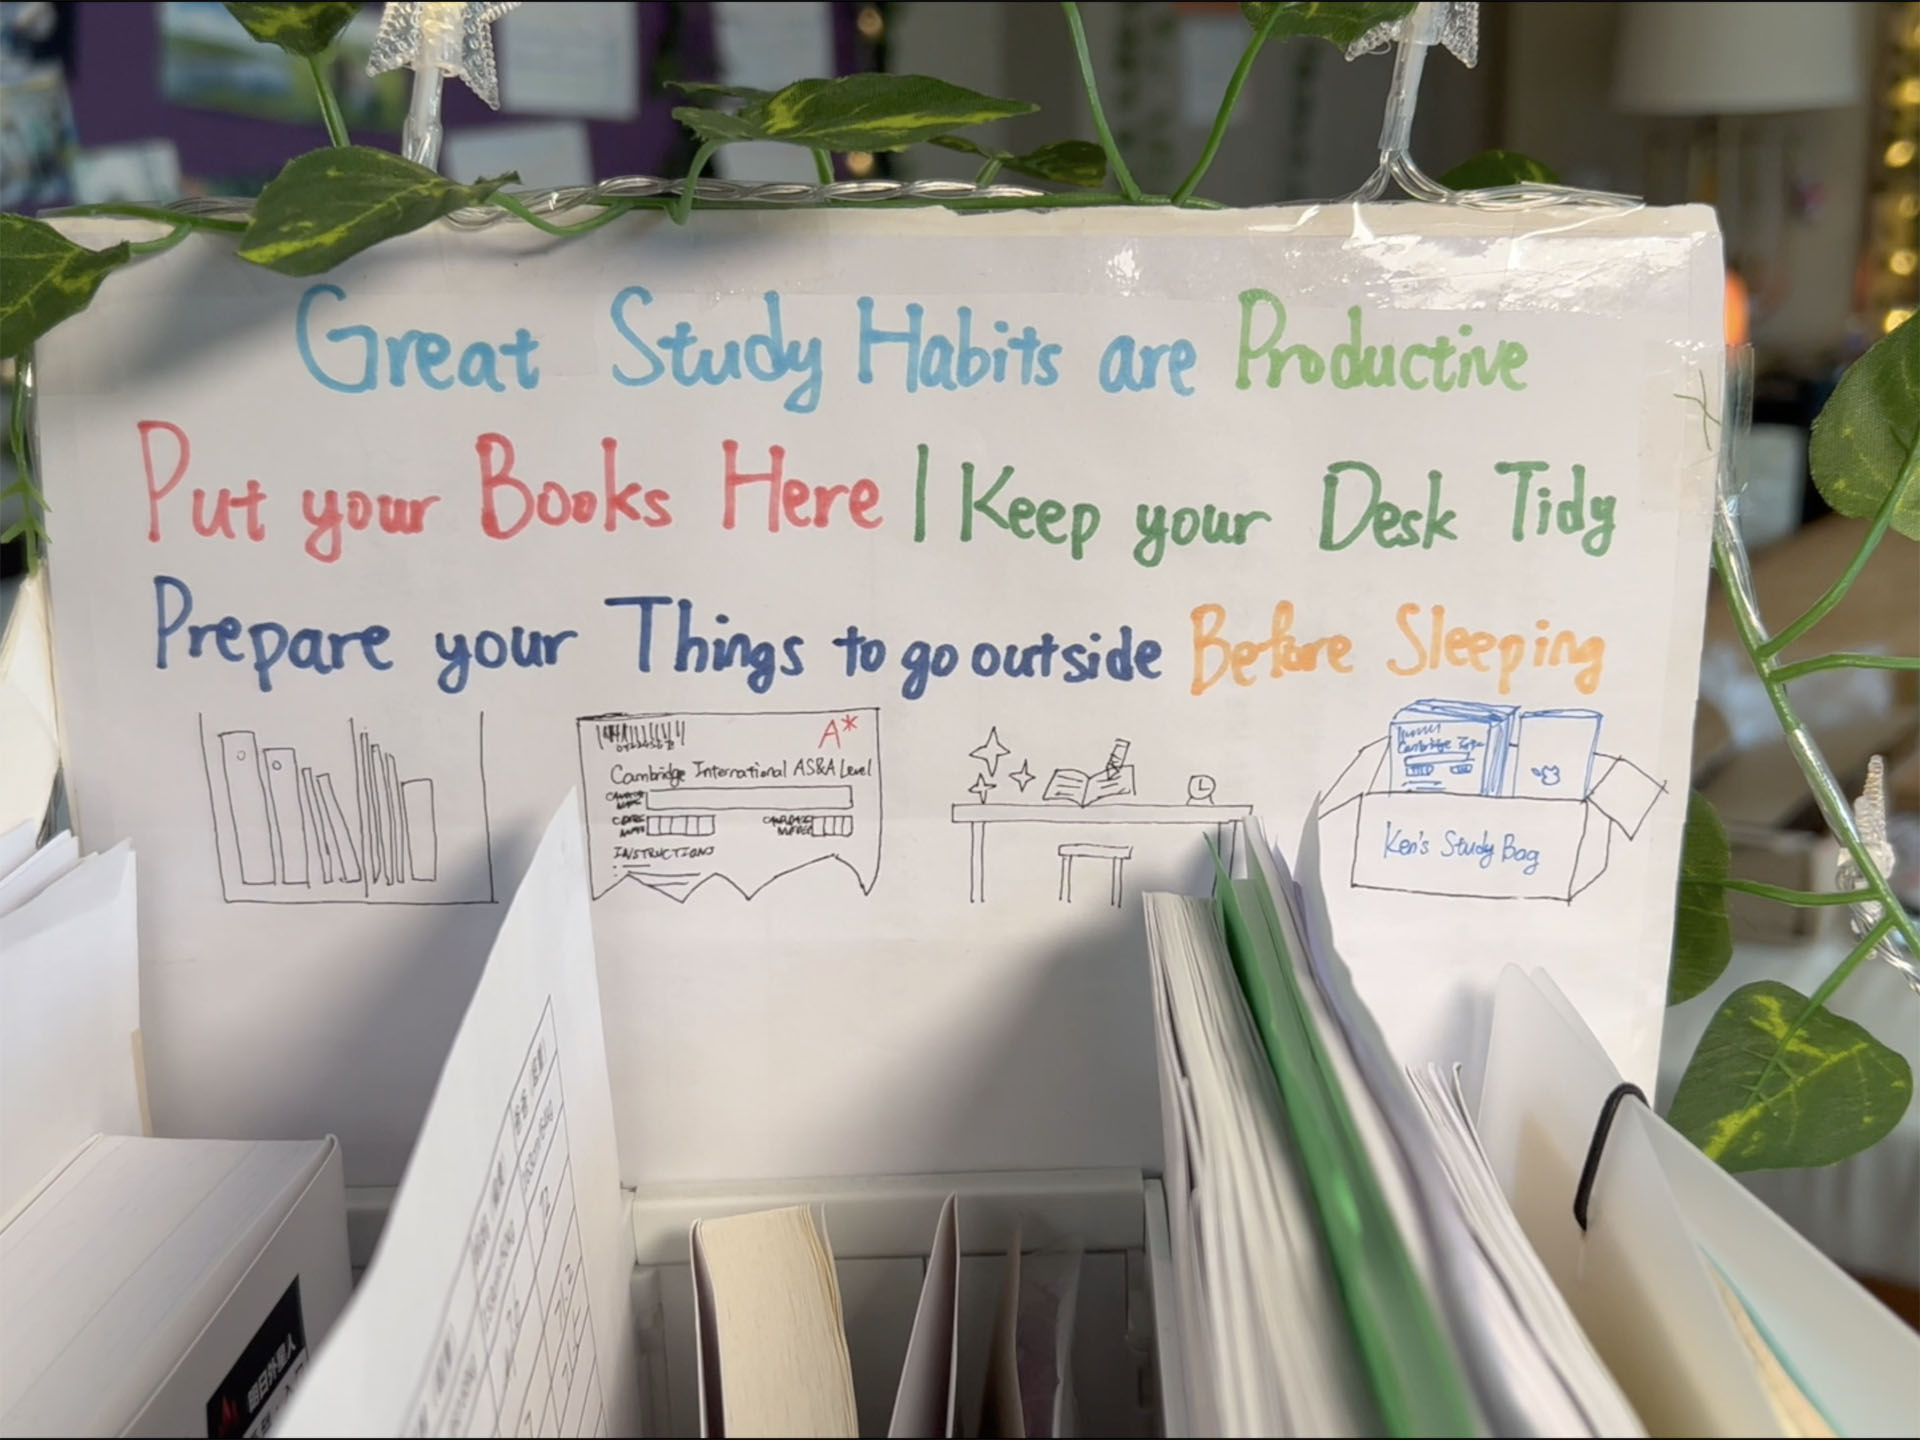 My Great Study Habits Posters with Rattans and Fairy Lights (Left)